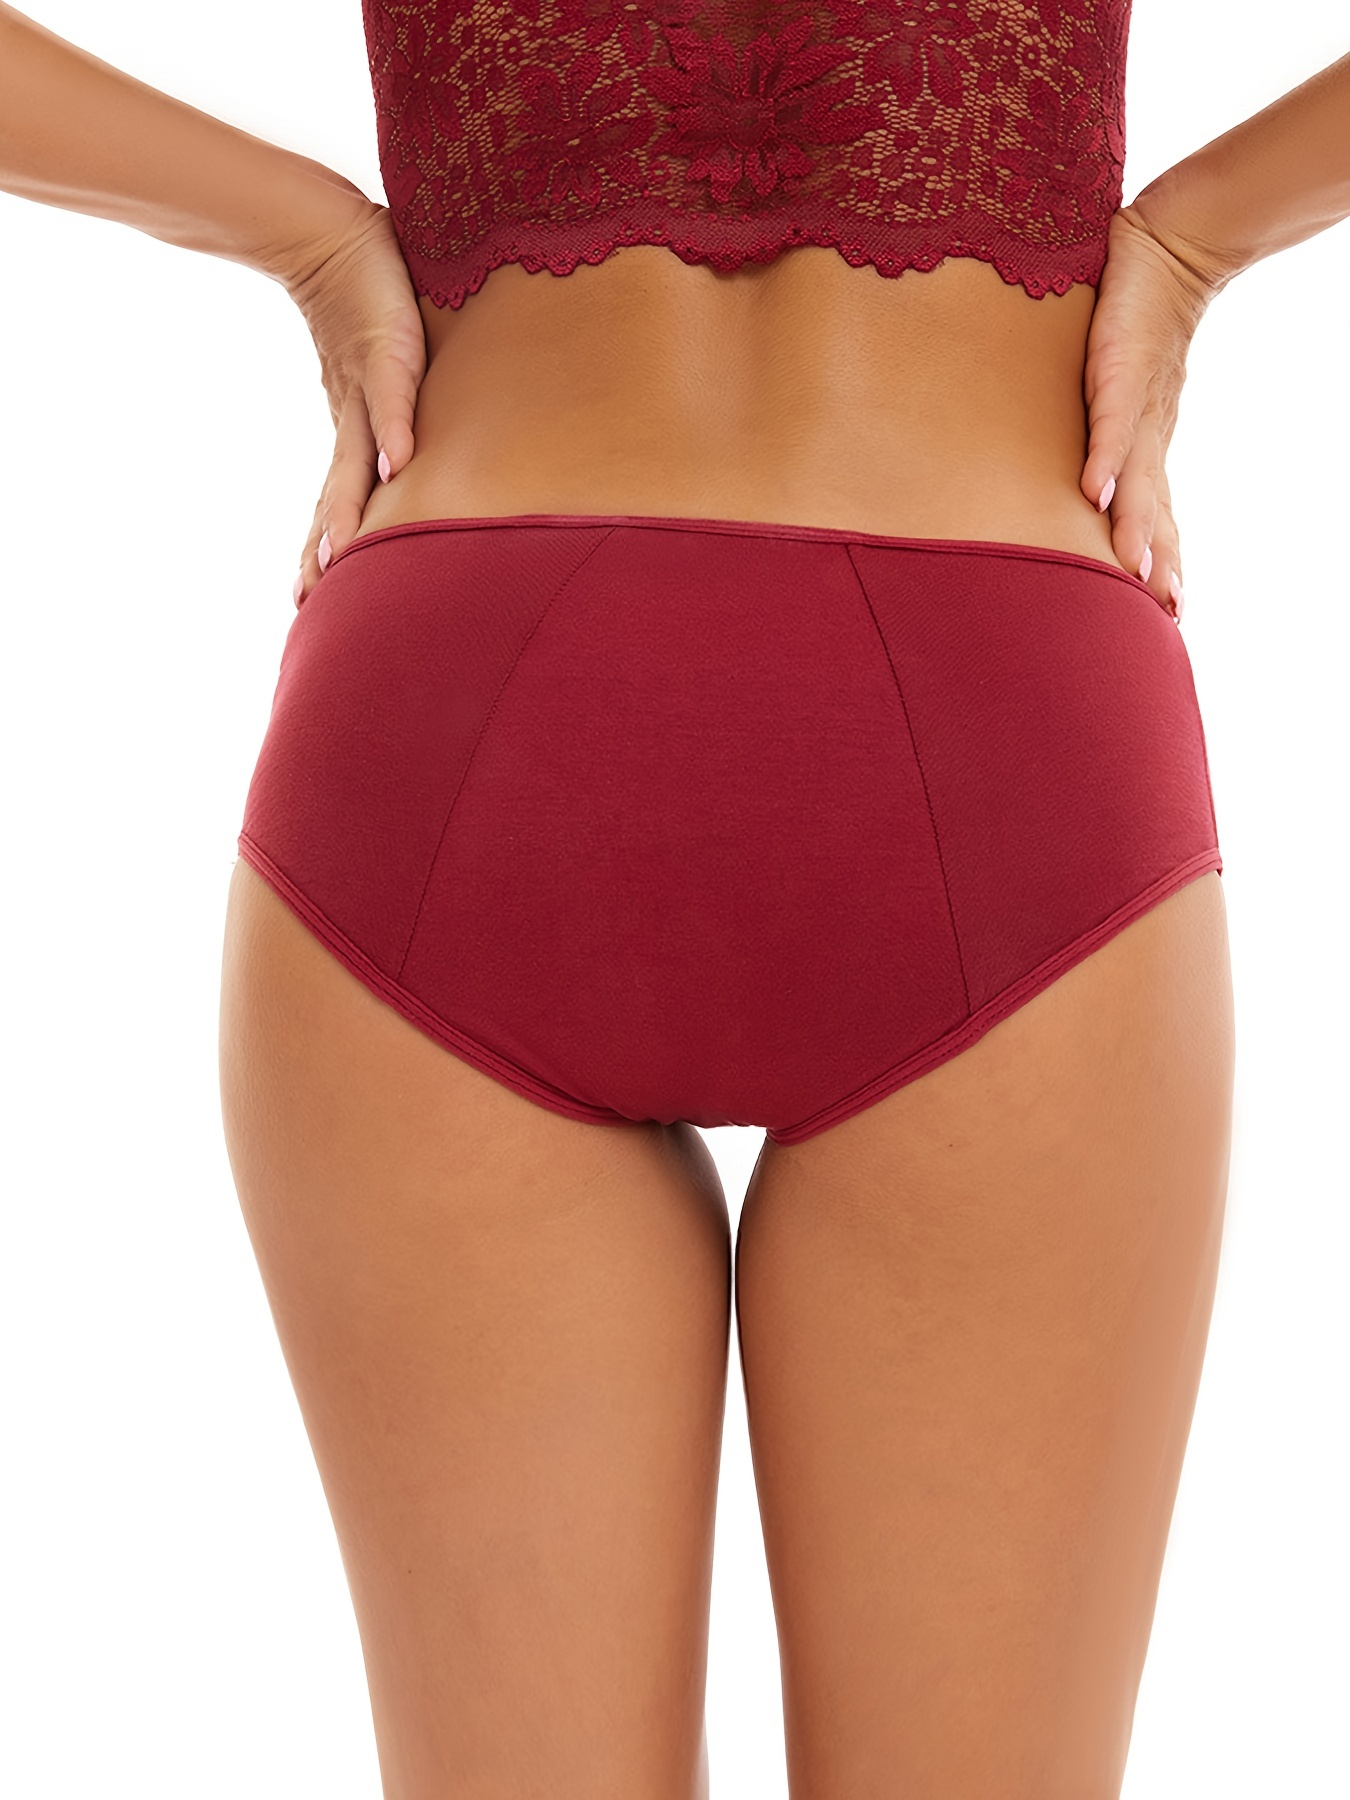 CODE RED period Panties Underwear With Pocket- Red L